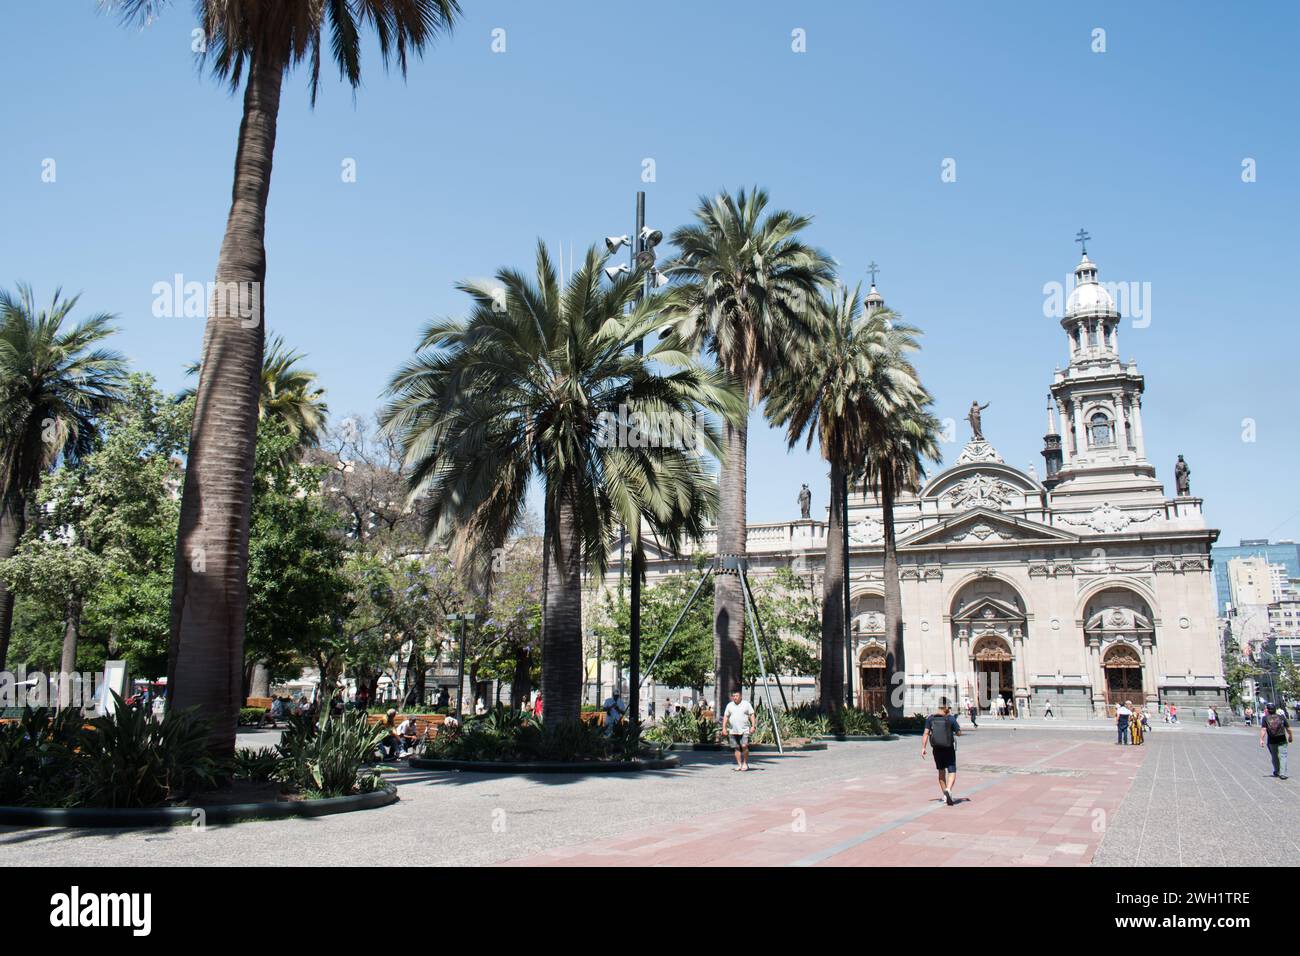 Santiago's Main Square, is a historic and cultural hub located in the heart of Santiago. It is surrounded by several important buildings. Stock Photo